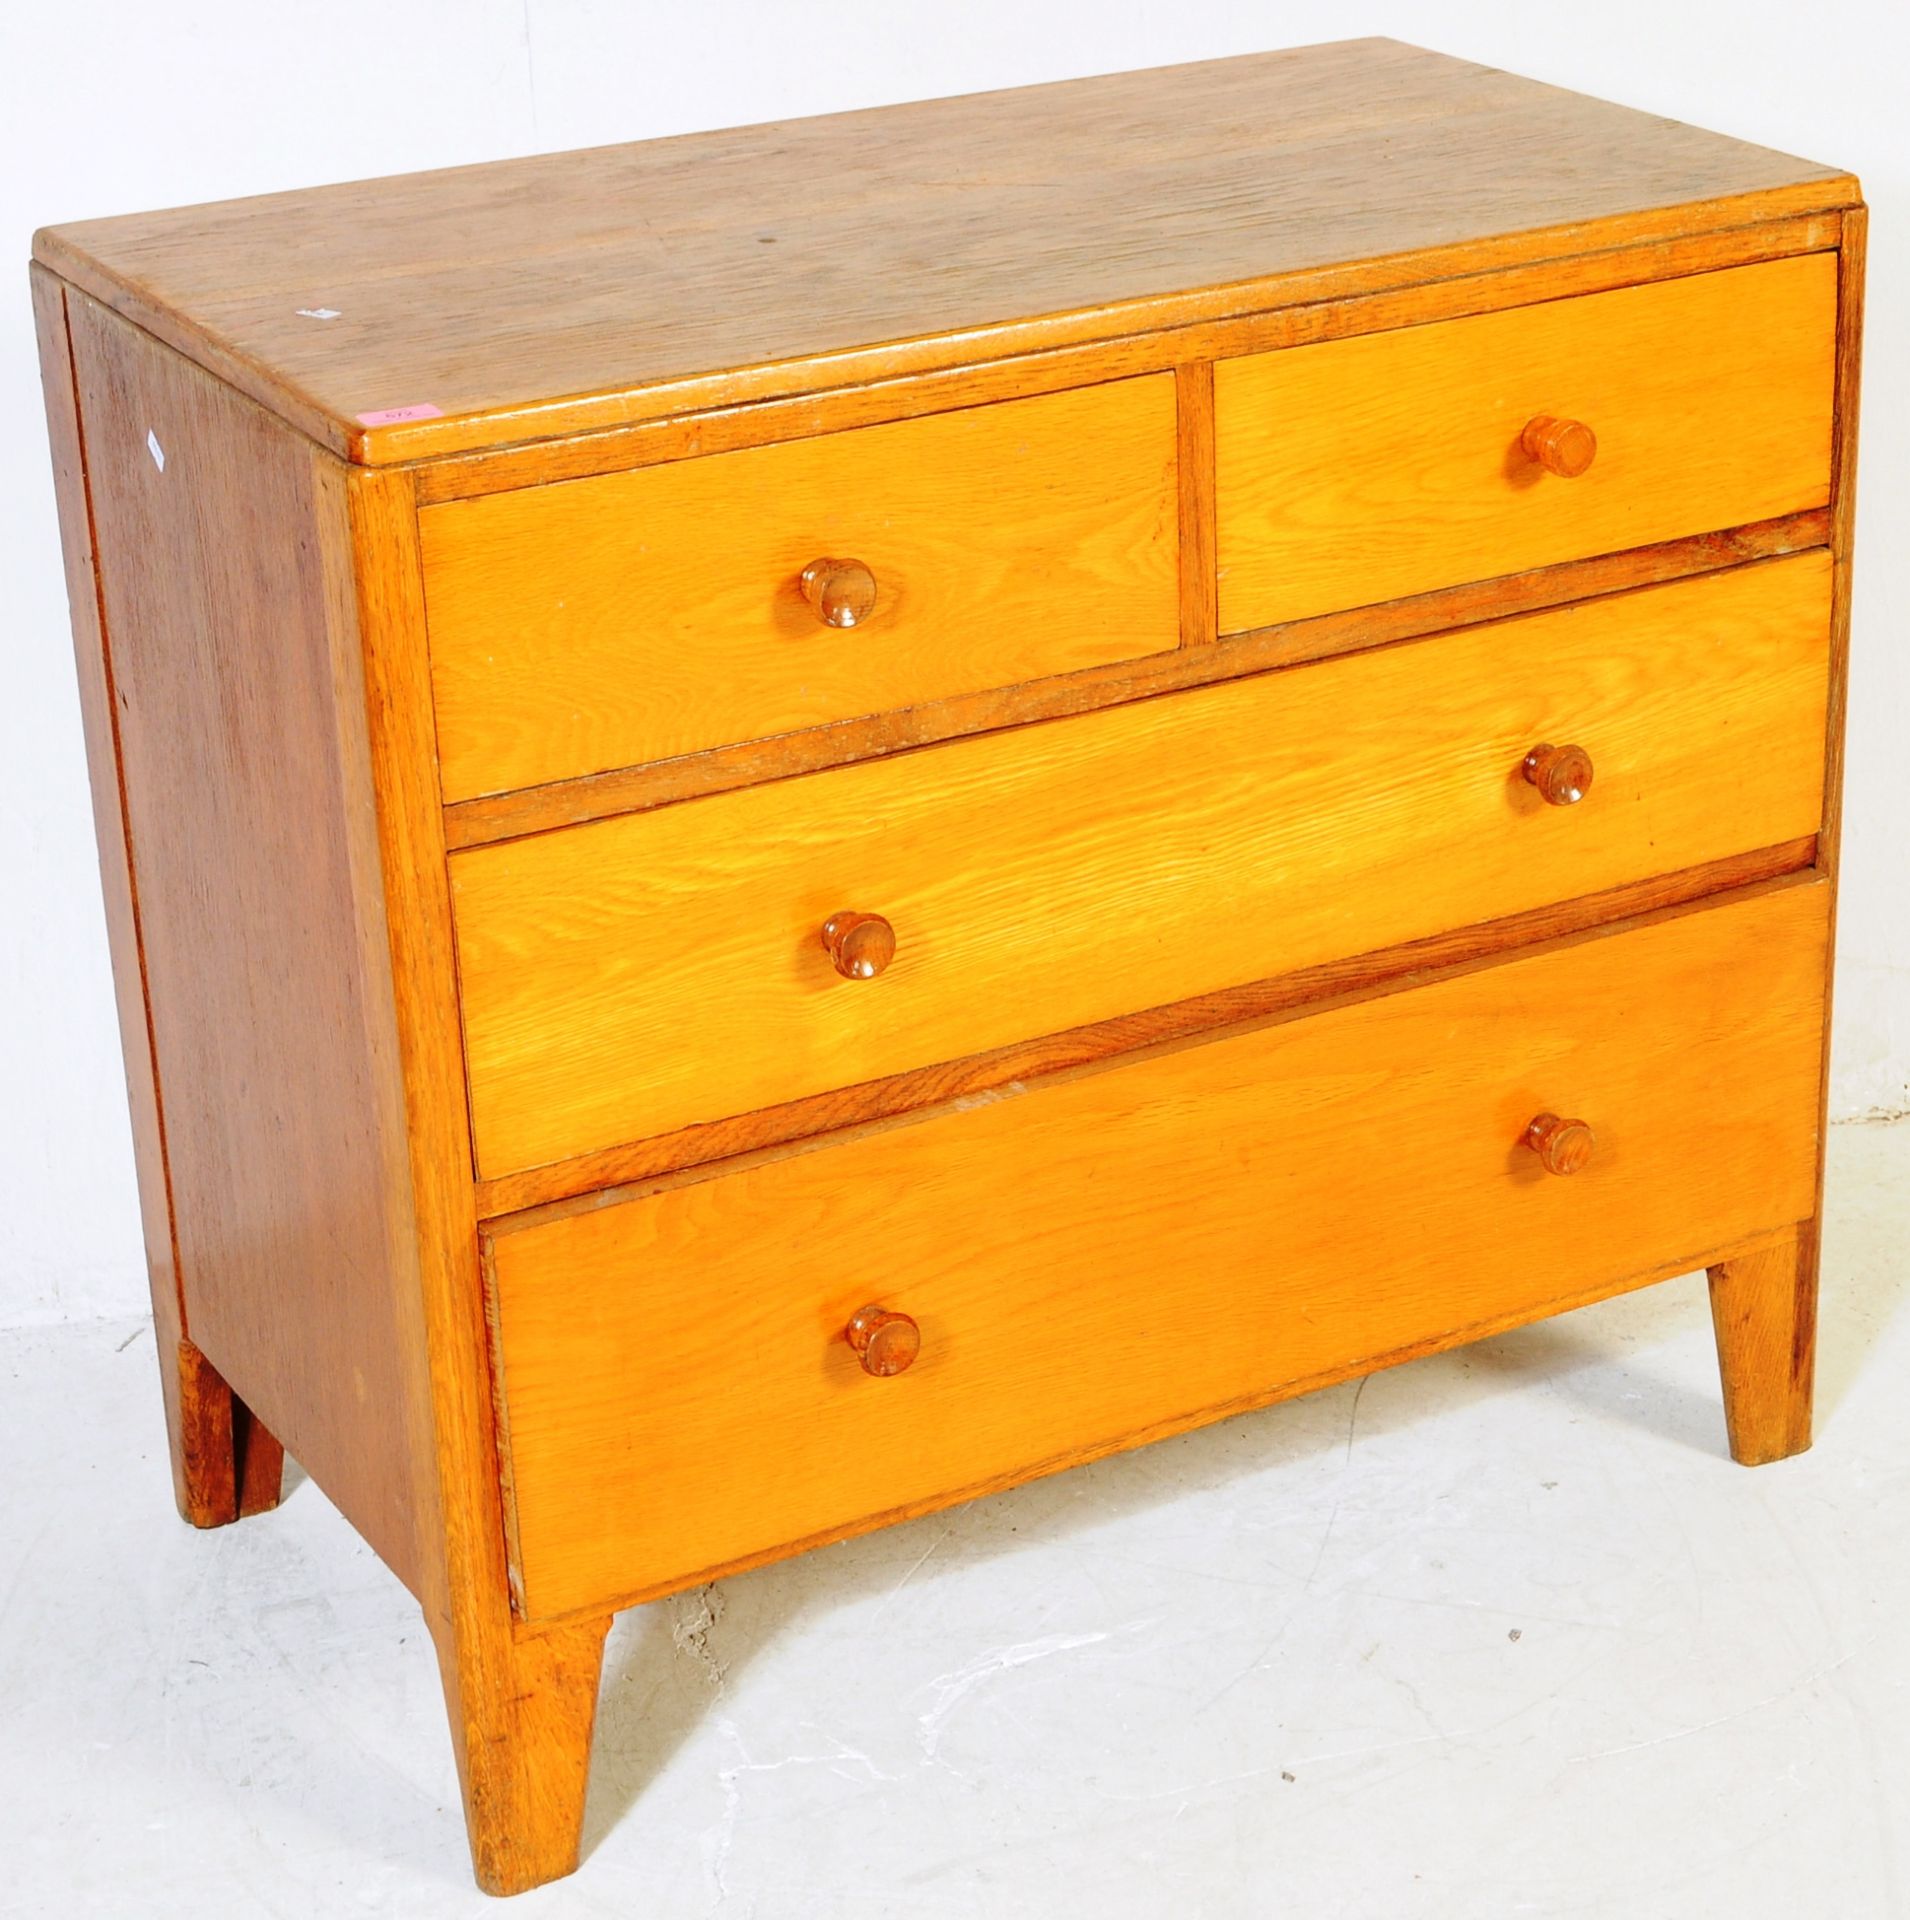 VINTAGE MID 20TH CENTURY MOD OAK CHEST OF DRAWERS - Image 2 of 6